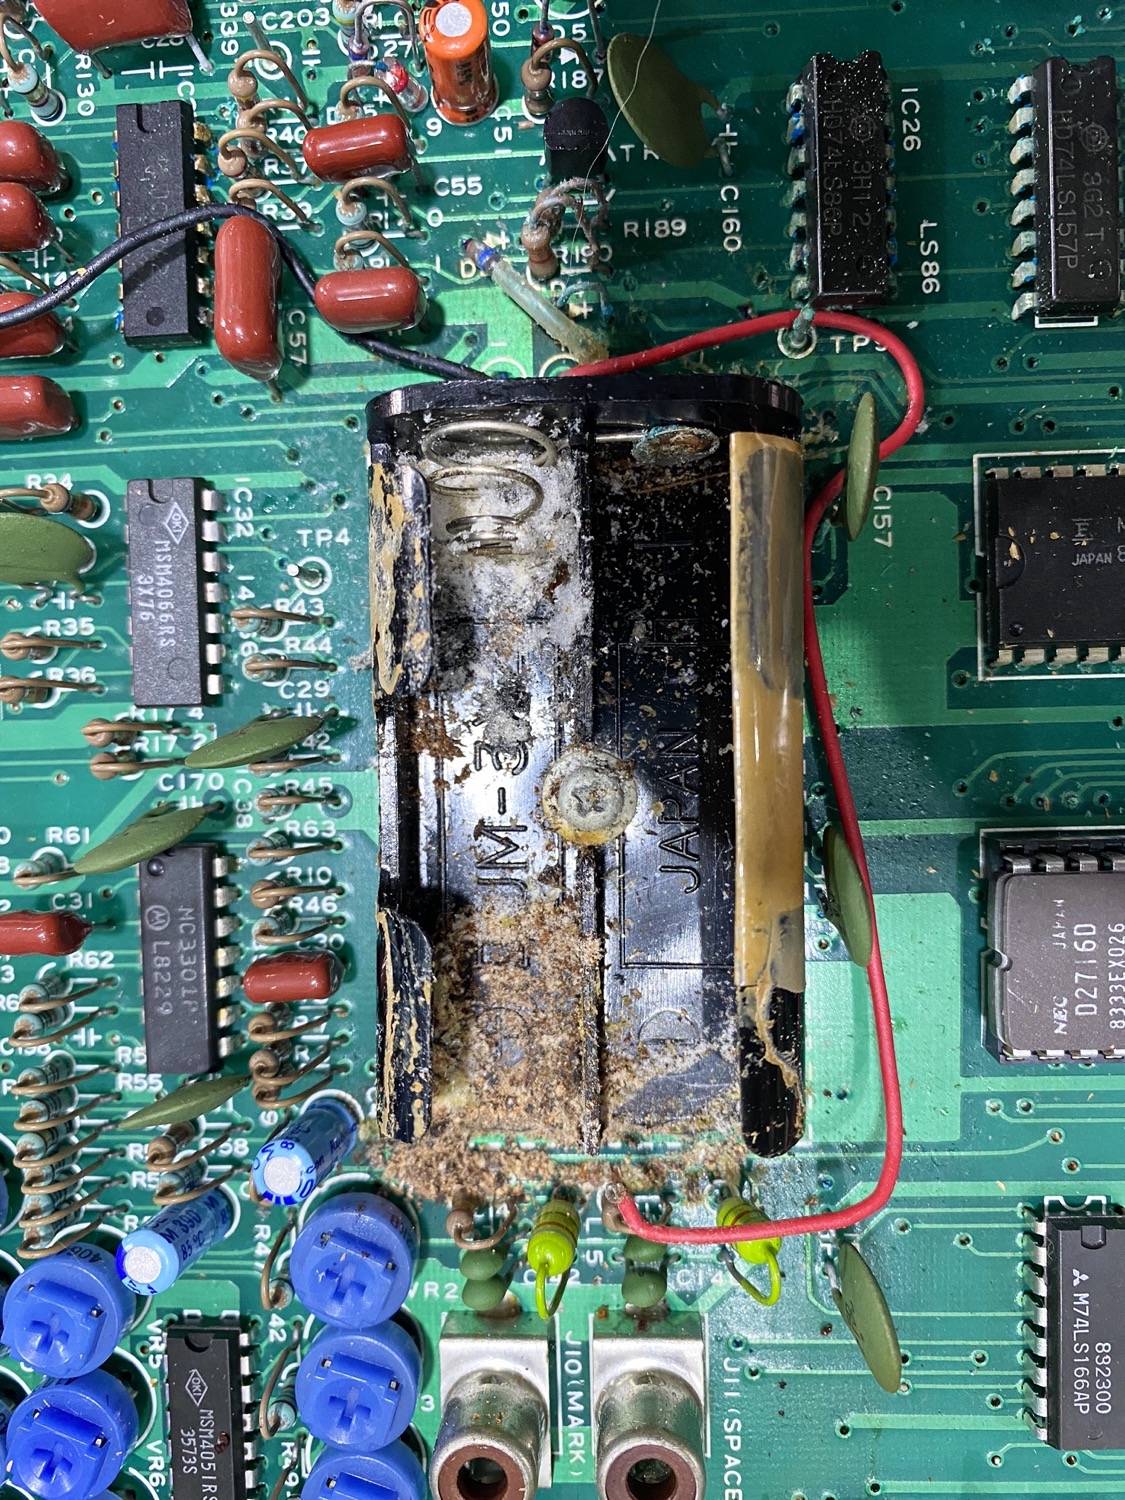 So What is left is a Mess, with some of the contents of the batteries making to the PCB with obvious consequences.